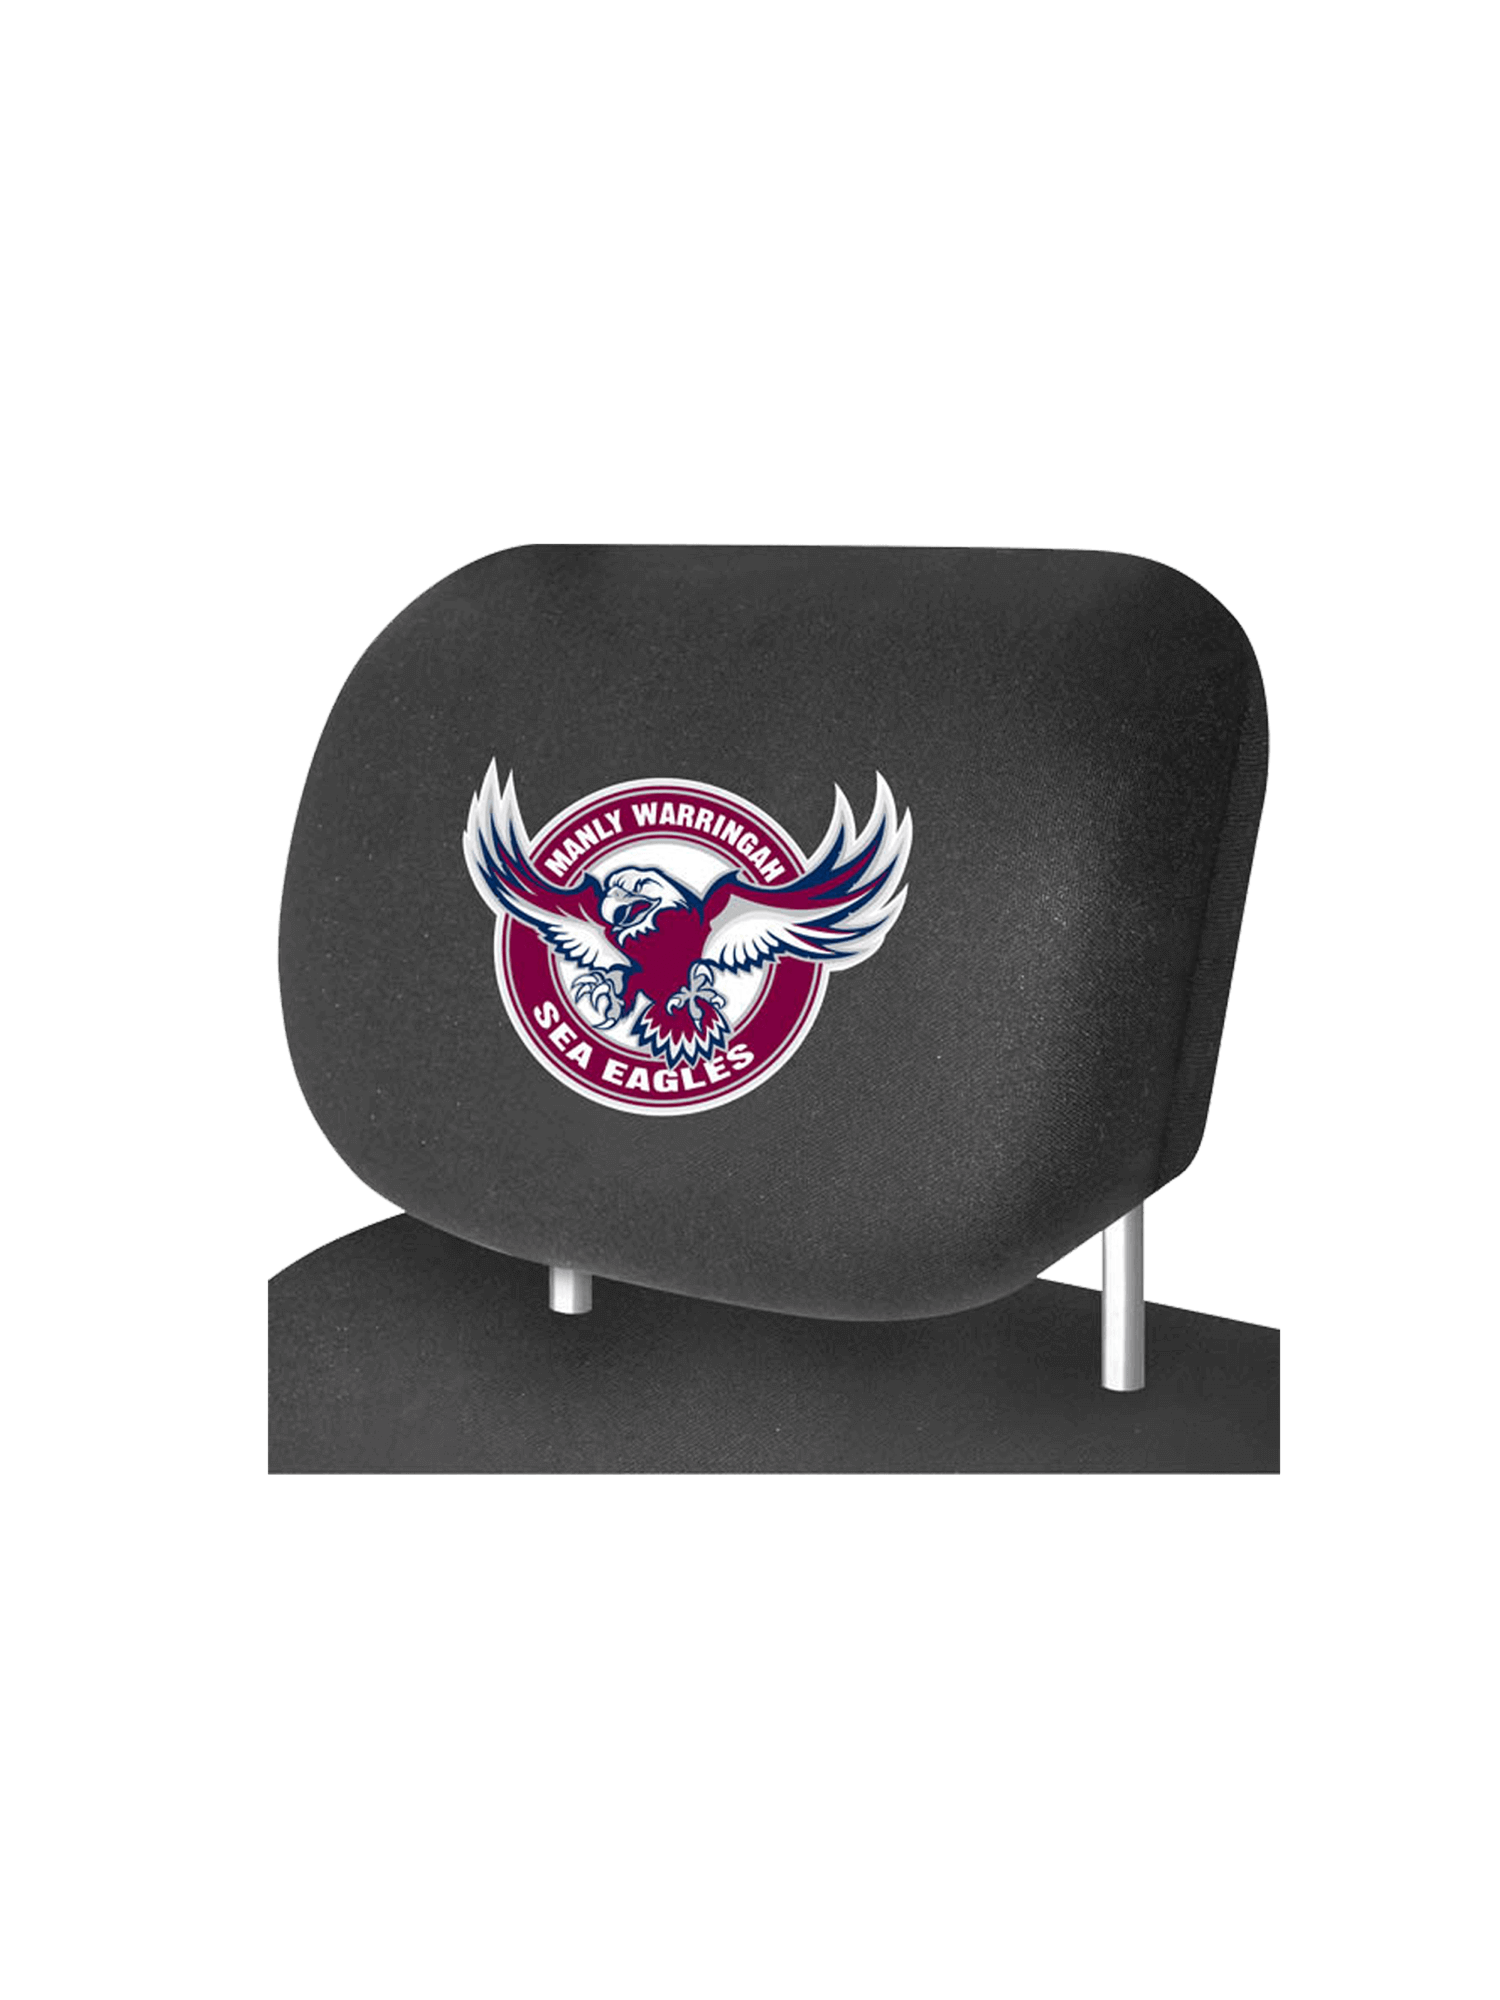 MANLY SEA EAGLES OFFICIAL HEADREST COVER_MANLY SEA EAGLES_STUBBY CLUB